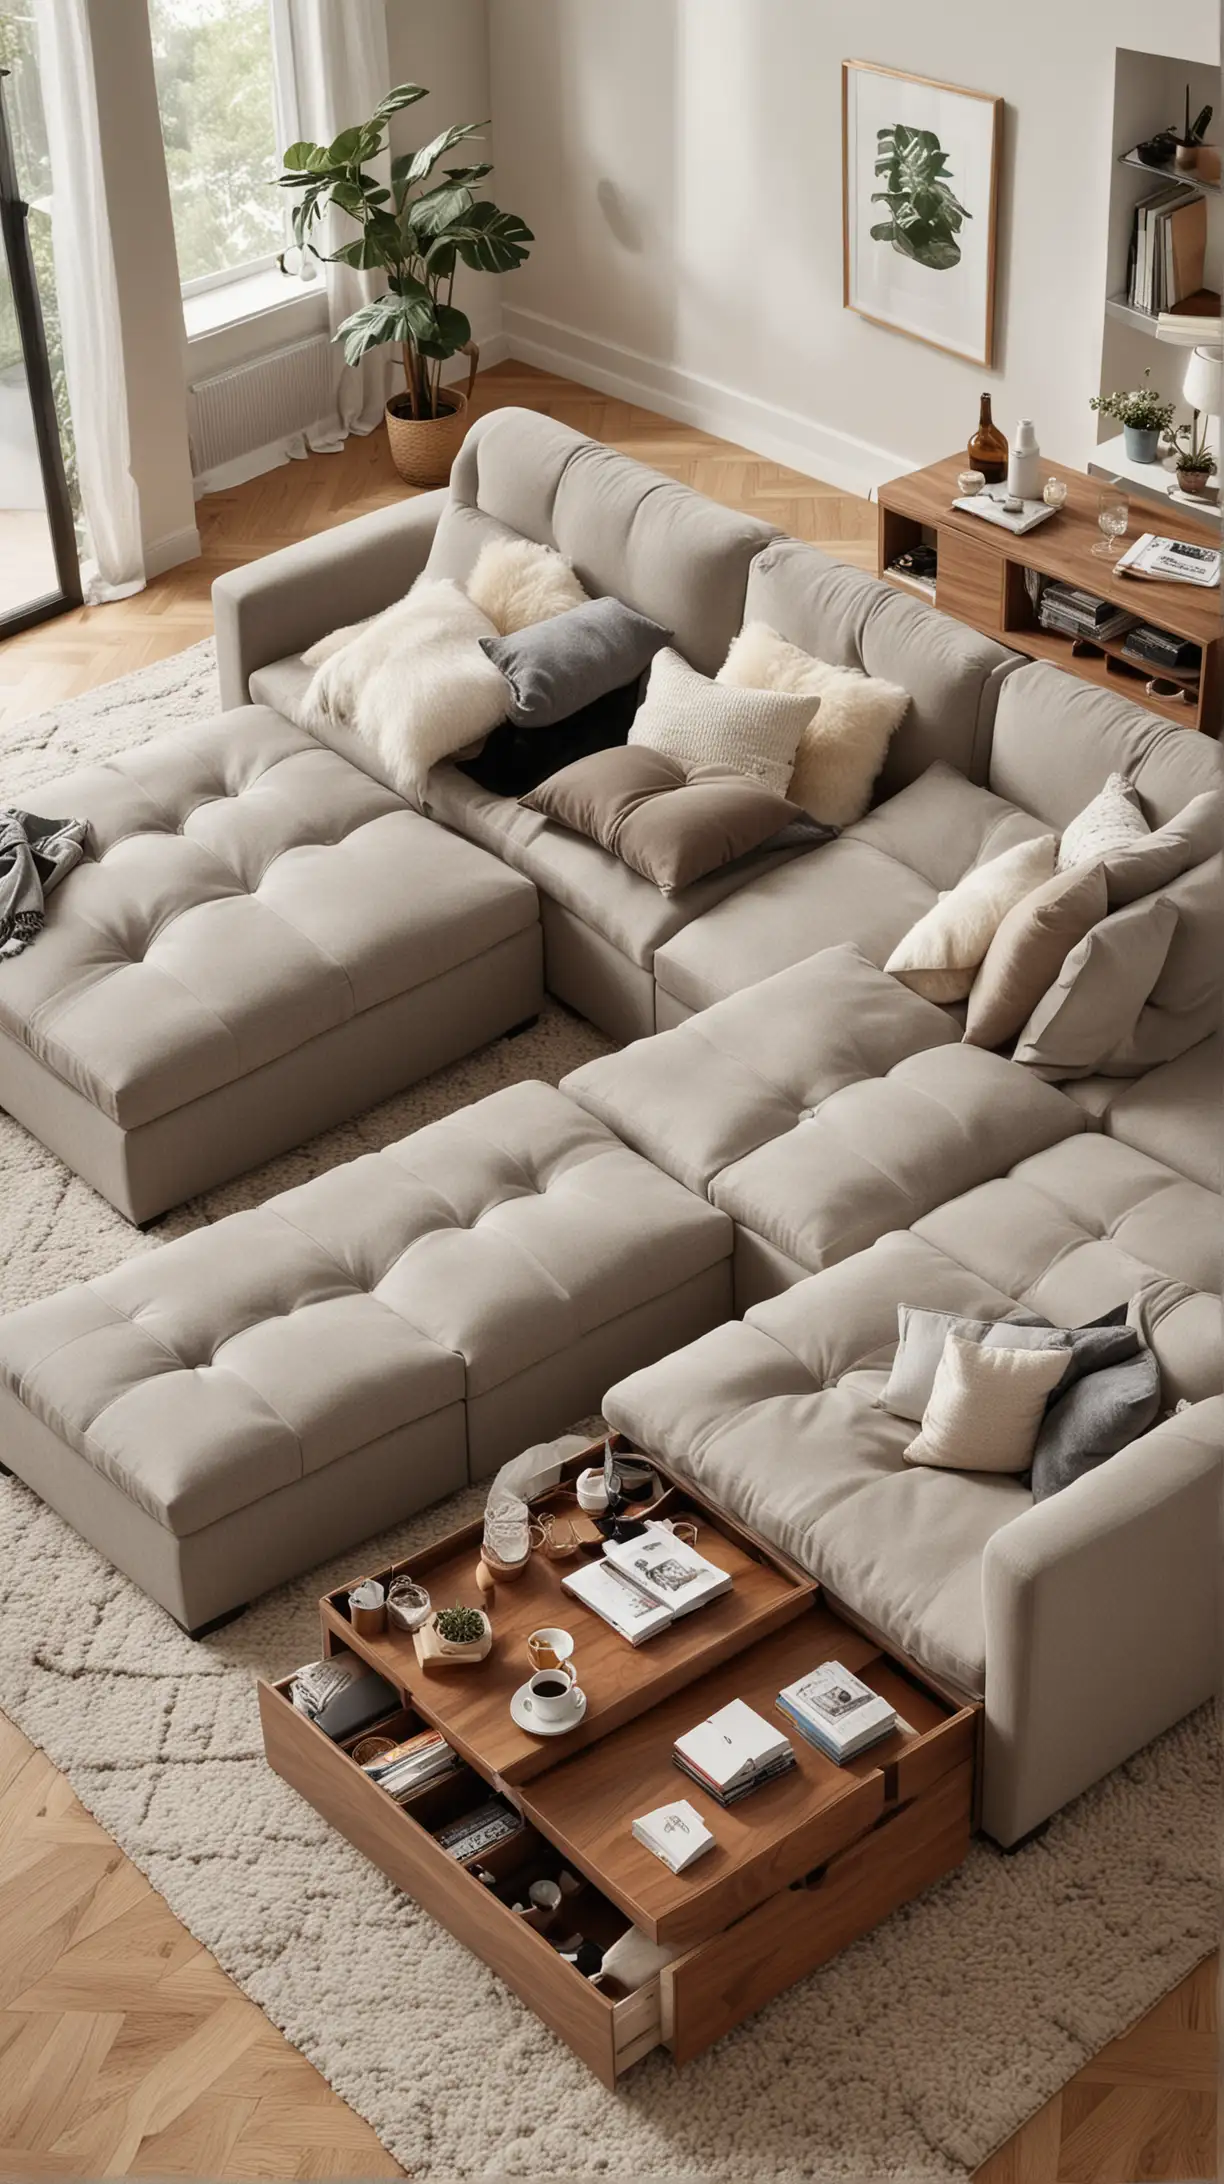 Contemporary Living Room with Stylish Storage Furniture Ottomans and Coffee Tables with Hidden Compartments